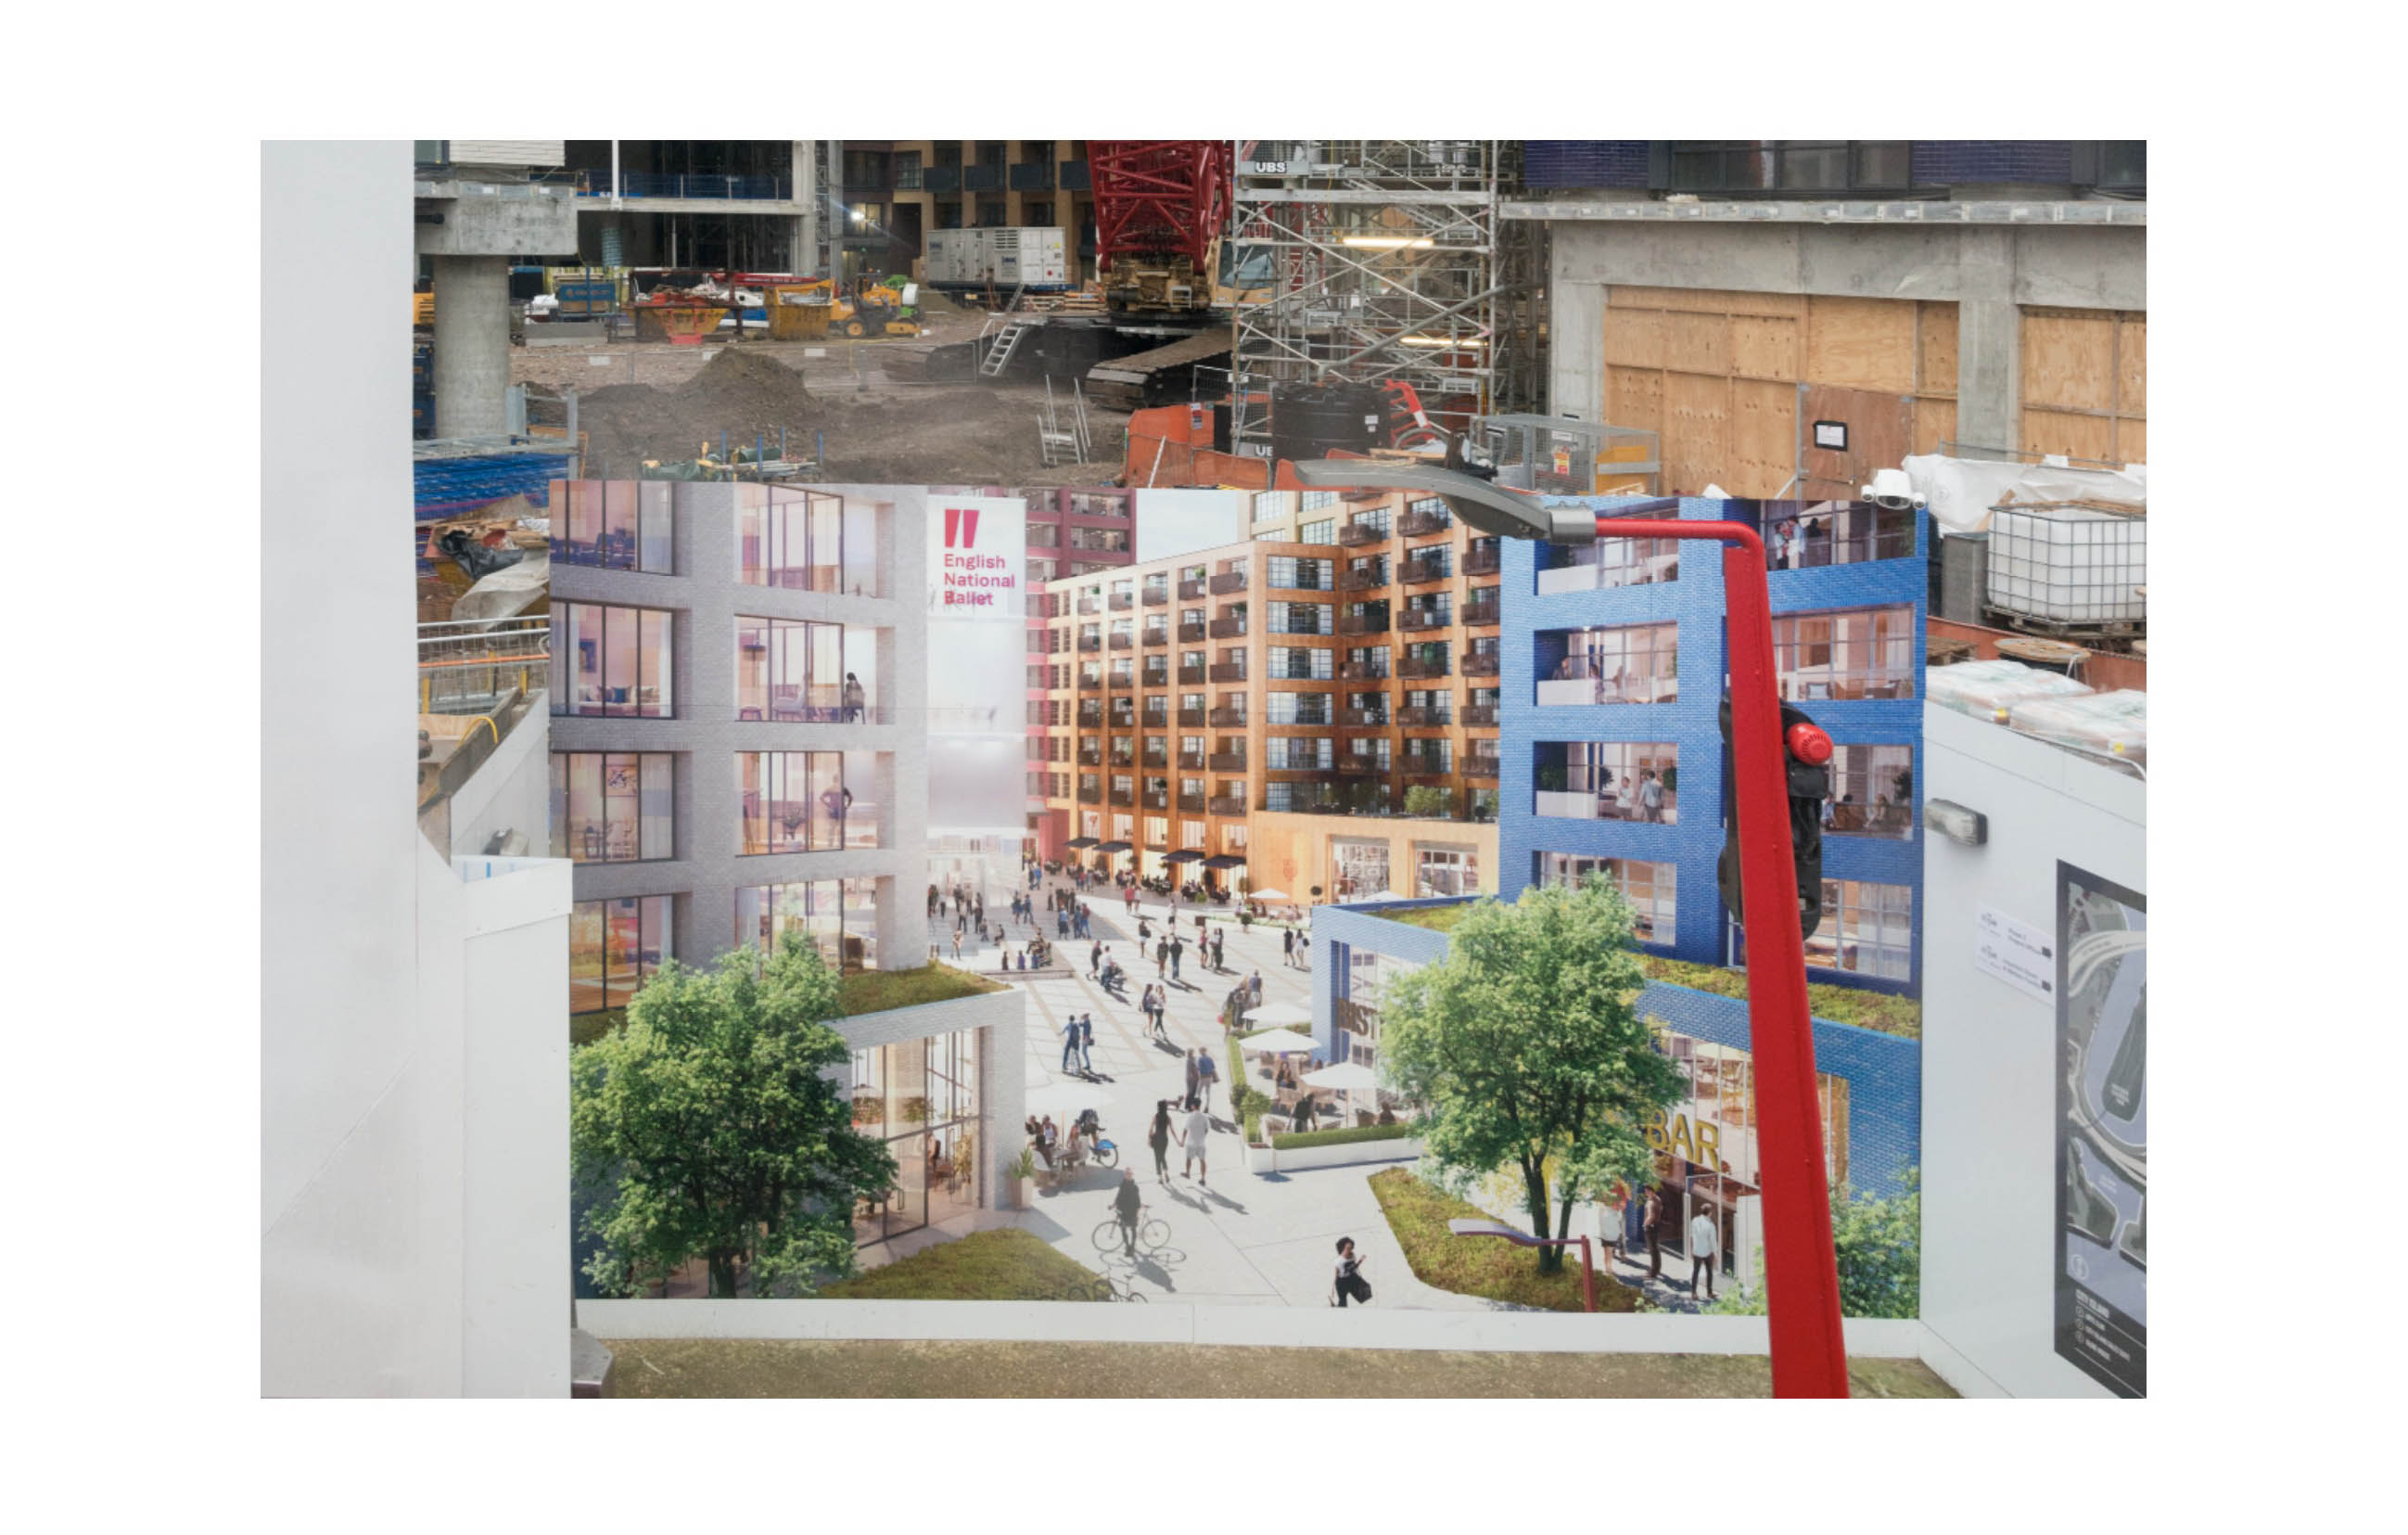 a hoarding shows a planned square with people in a new development, beyond the hoarding lies a chaotic building site